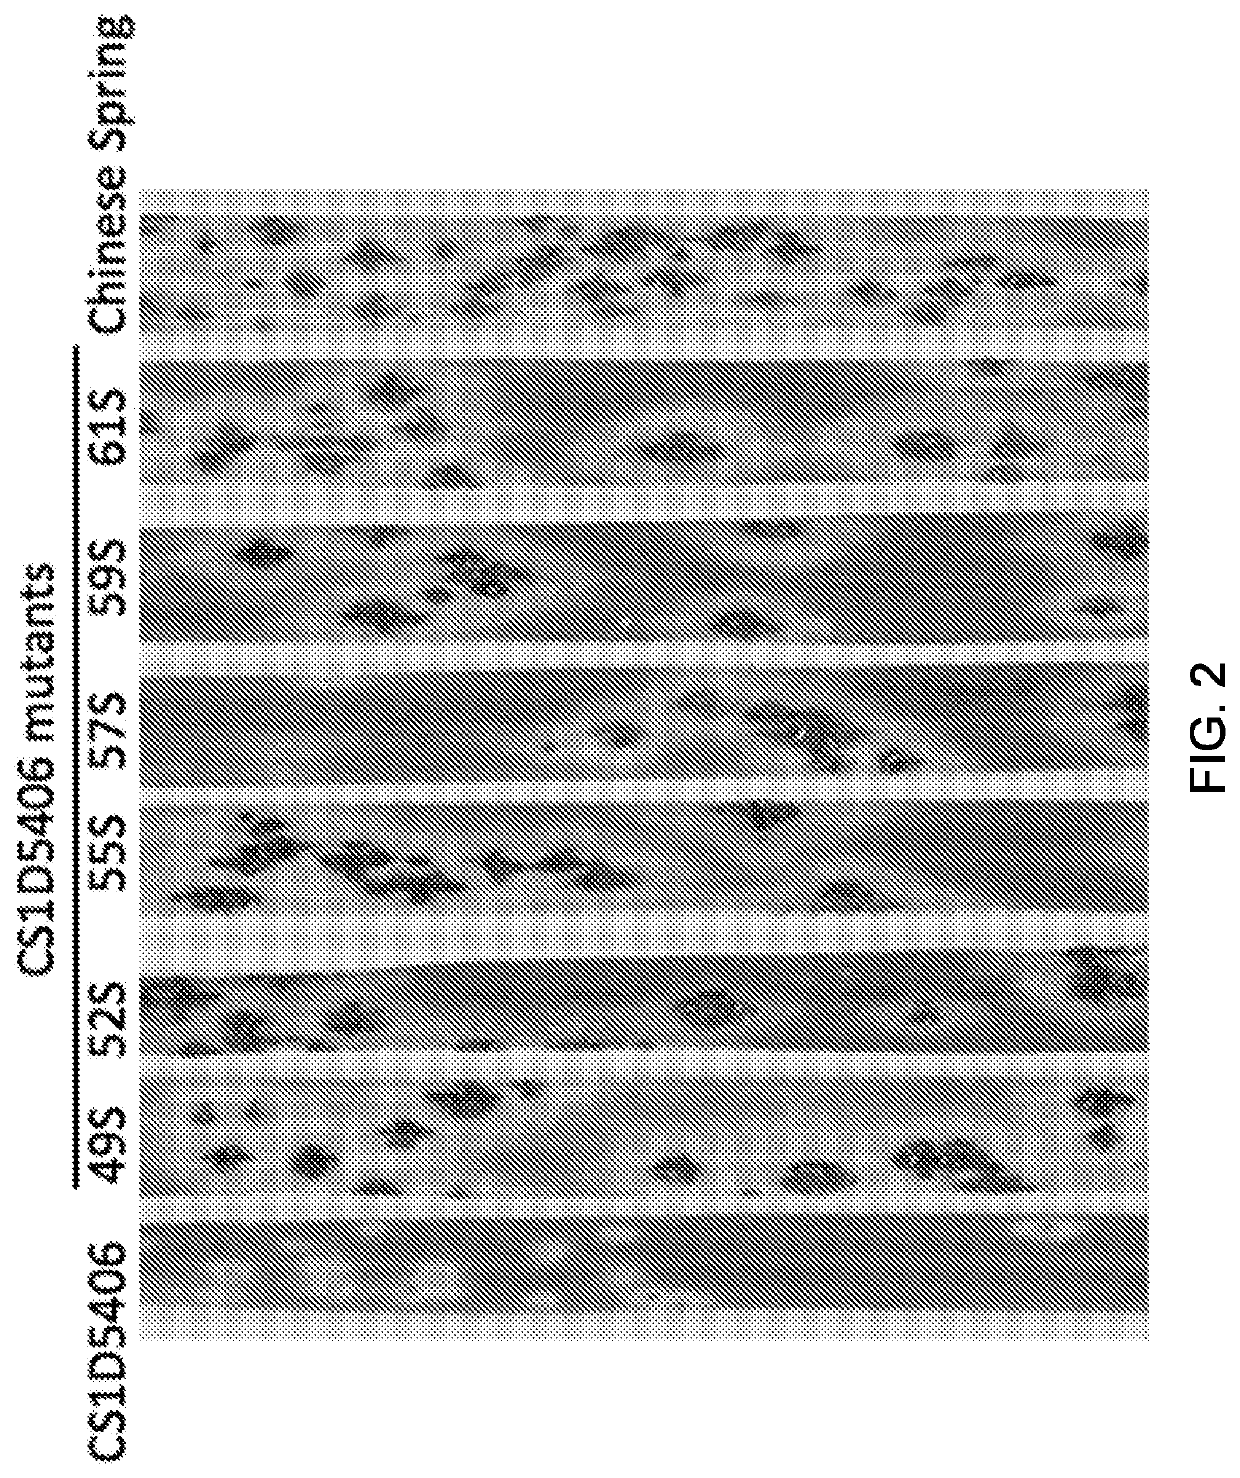 Wheat stem rust resistance genes and methods of use